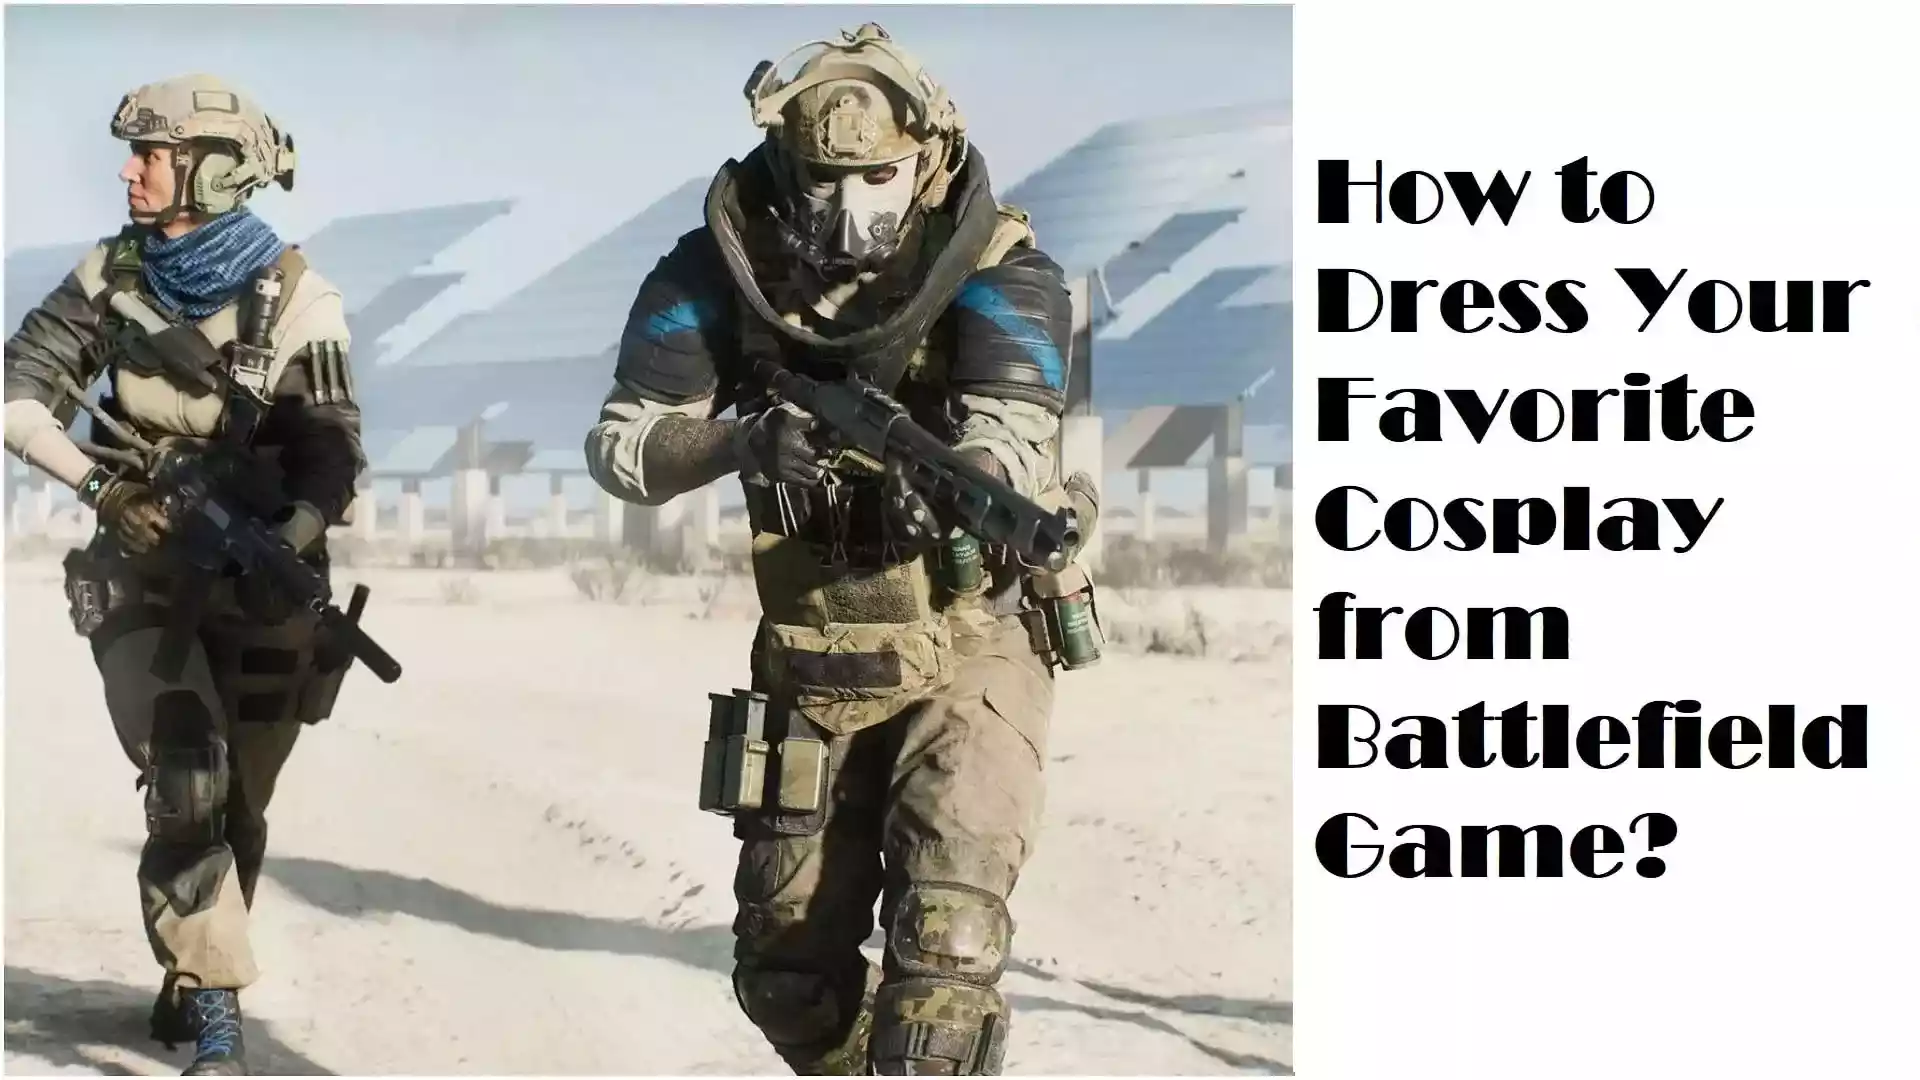 How to Dress Your Favorite Cosplay from Battlefield Game